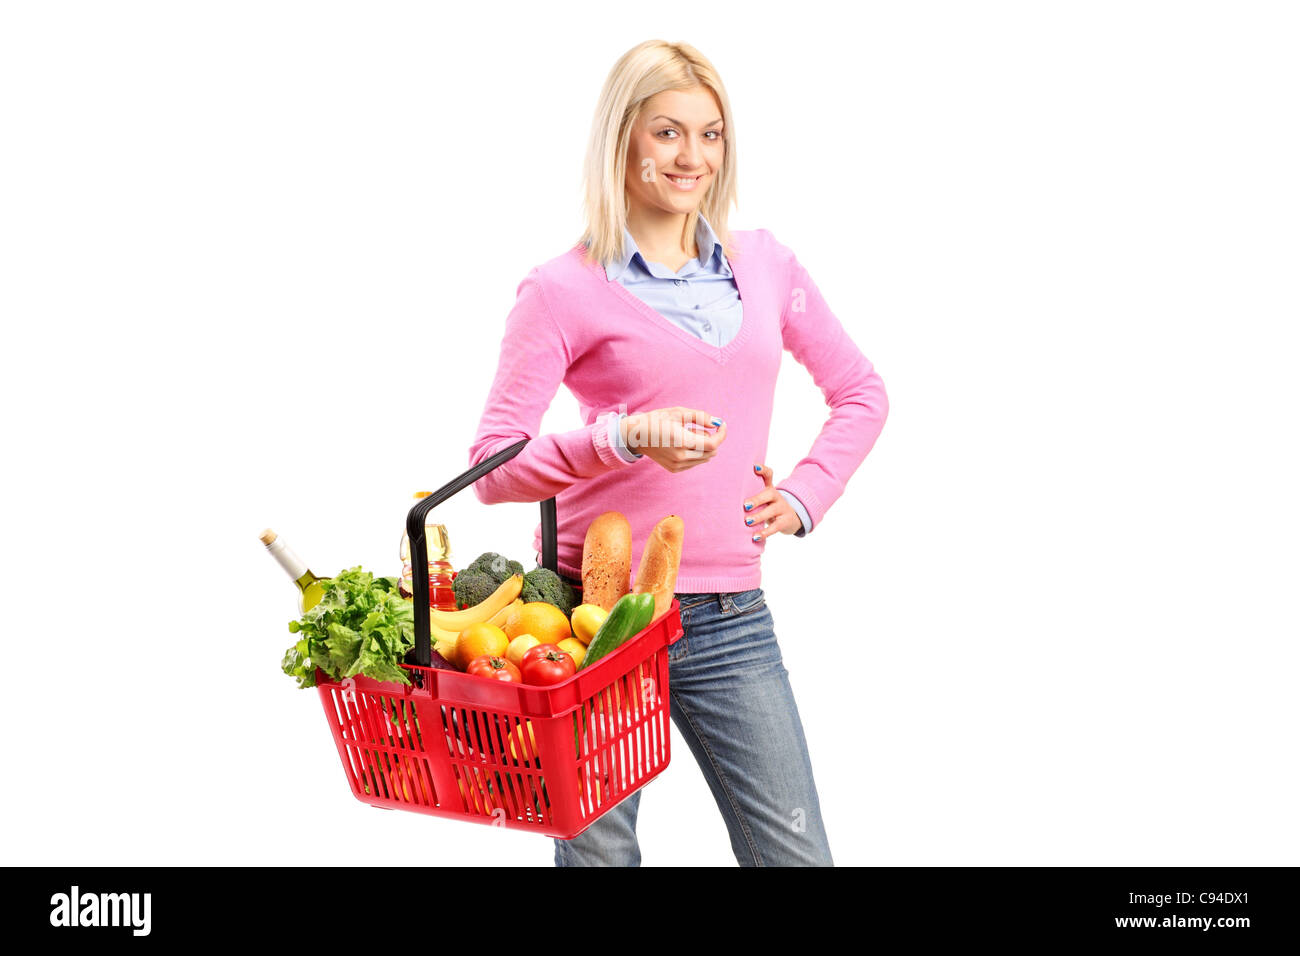 A young woman holding a full shopping basket Stock Photo